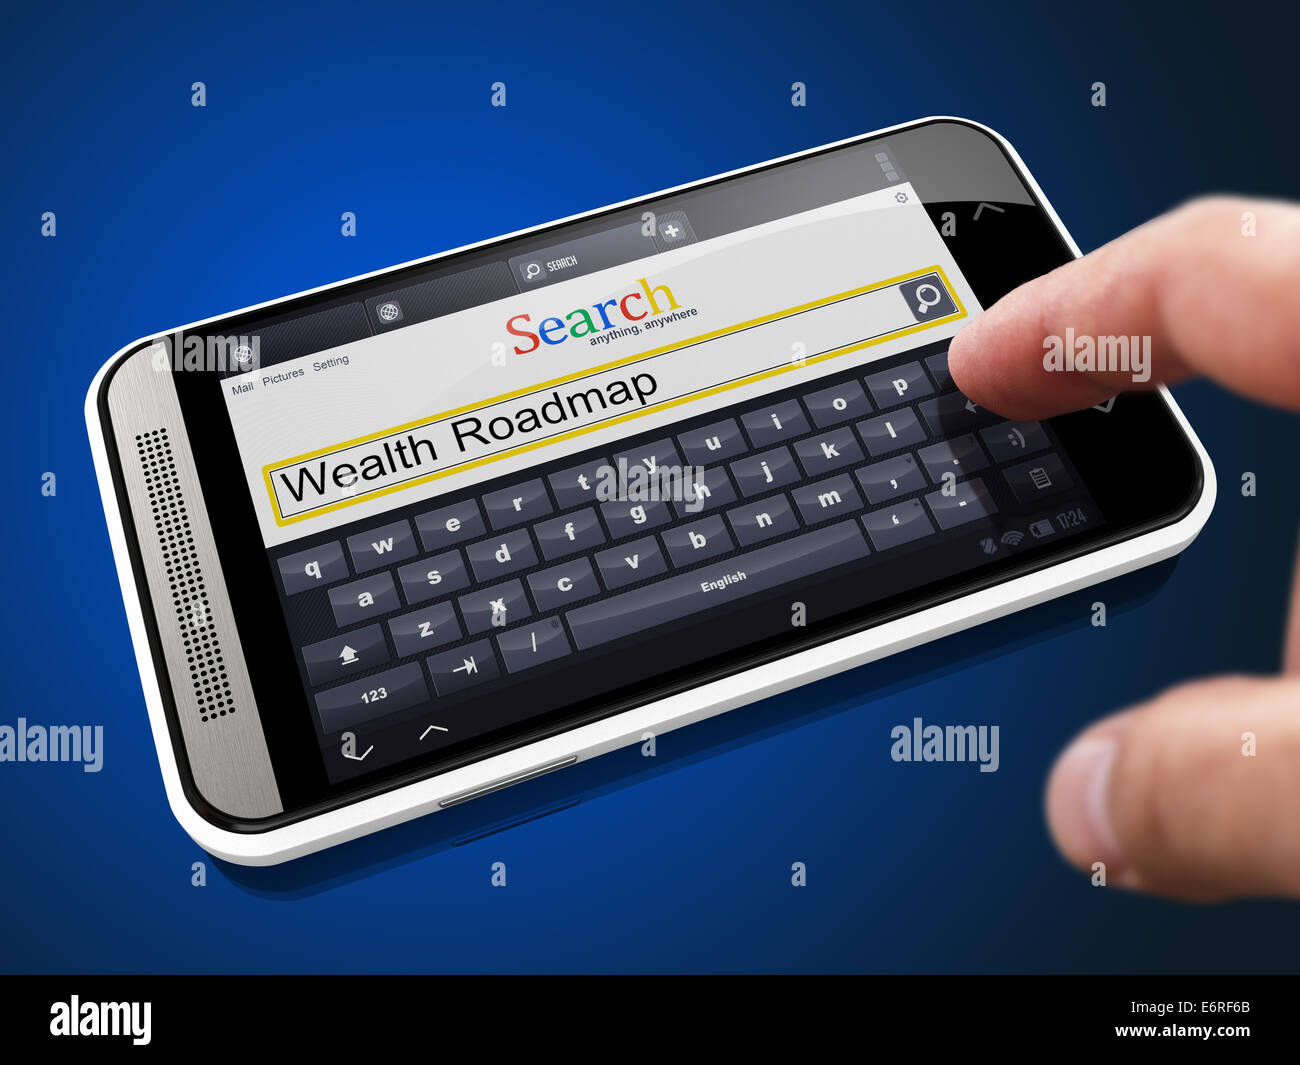 Wealth Roadmap in Search String on Smartphone. Stock Photo